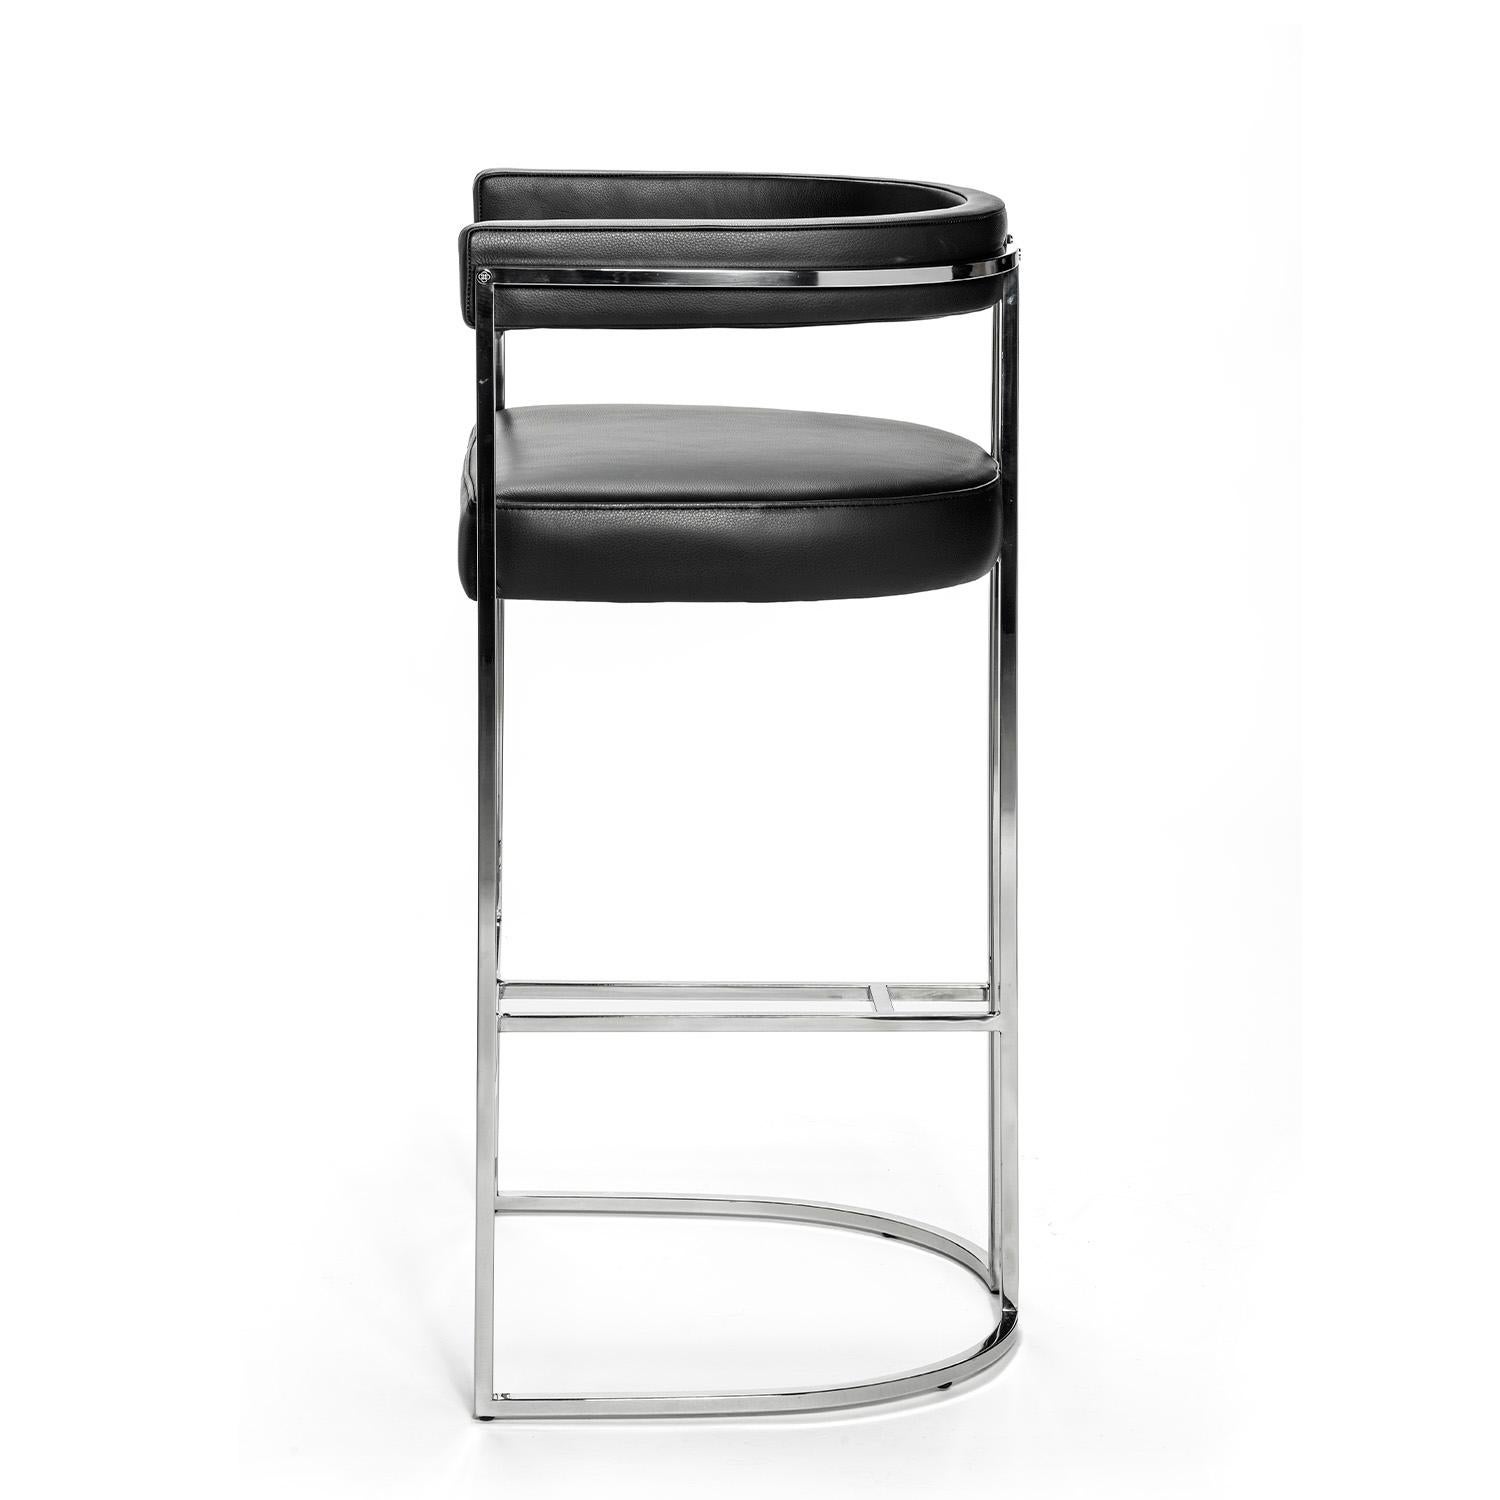 The julius bar stool is a timeless and understated luxury piece. Crafted with great attention to details and noble materials such as stainless steel and leather. A stylish yet timeless bar stool perfect to adorn any bar or living room.

Shown in